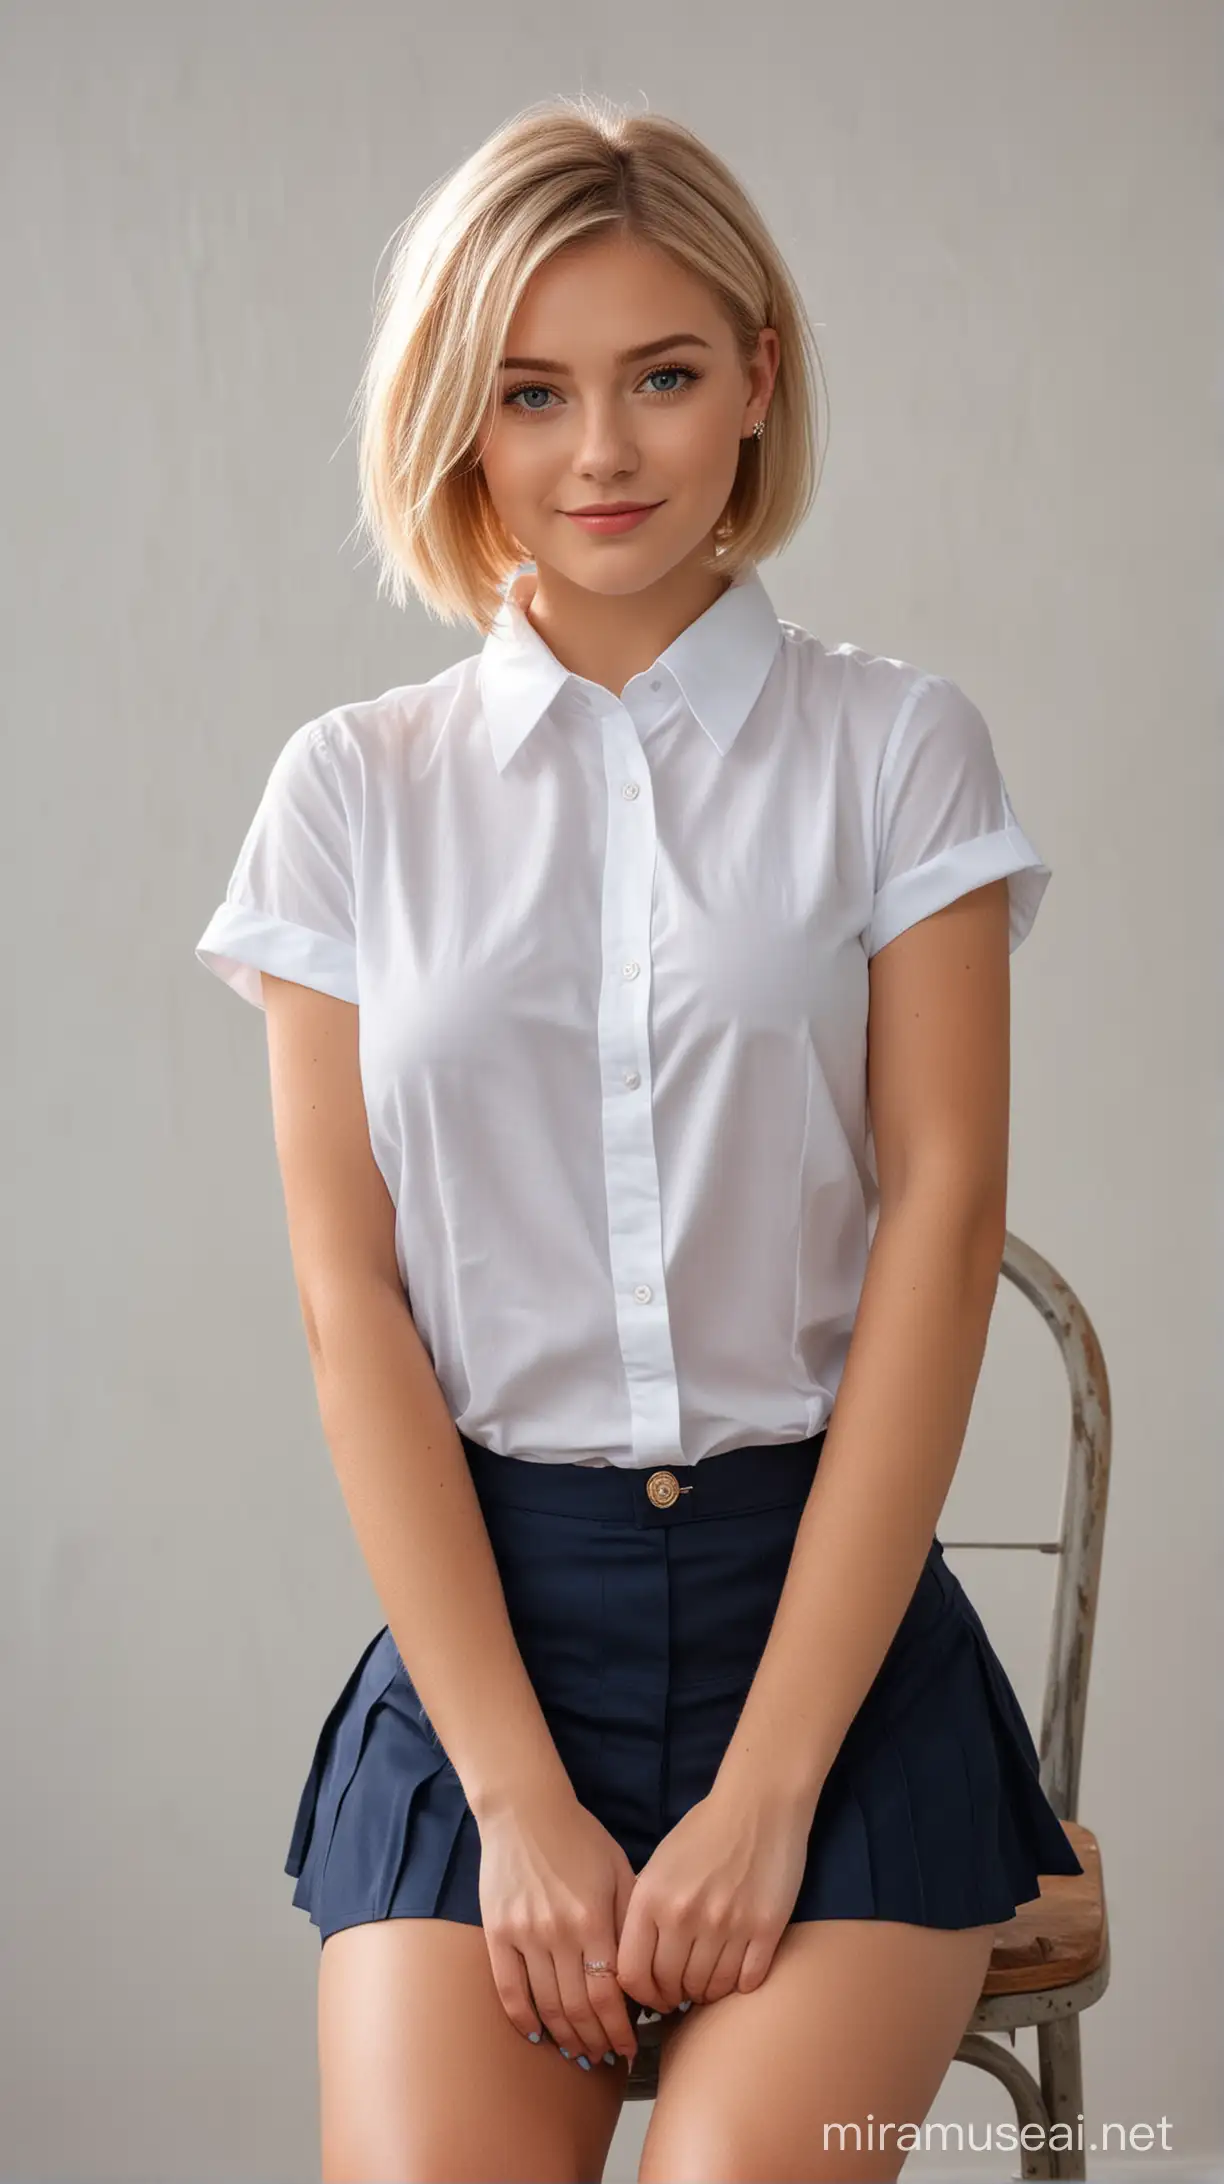 beautiful school girl, school uniform, white shirt, posing to camera, looking at camera, extreme realistic, shiny glossy short bob blonde haircut with red band on hairs, blue eyes, white formal shirt, navy blue colored short skirt, looking at camera, smile, shy, blush, extreme details, extreme details for hairs eyes and lips, realistic skin texture, outside background in school garden, sunlight making her hairs glow. portrait, short sleeve shirt, belt on skirt, red hair band on hairs, her face clear with realistic texture, body in sexy shape. image fit till chest, hands on face shy blushing eyes happy, sitting on chair, looking at right side
